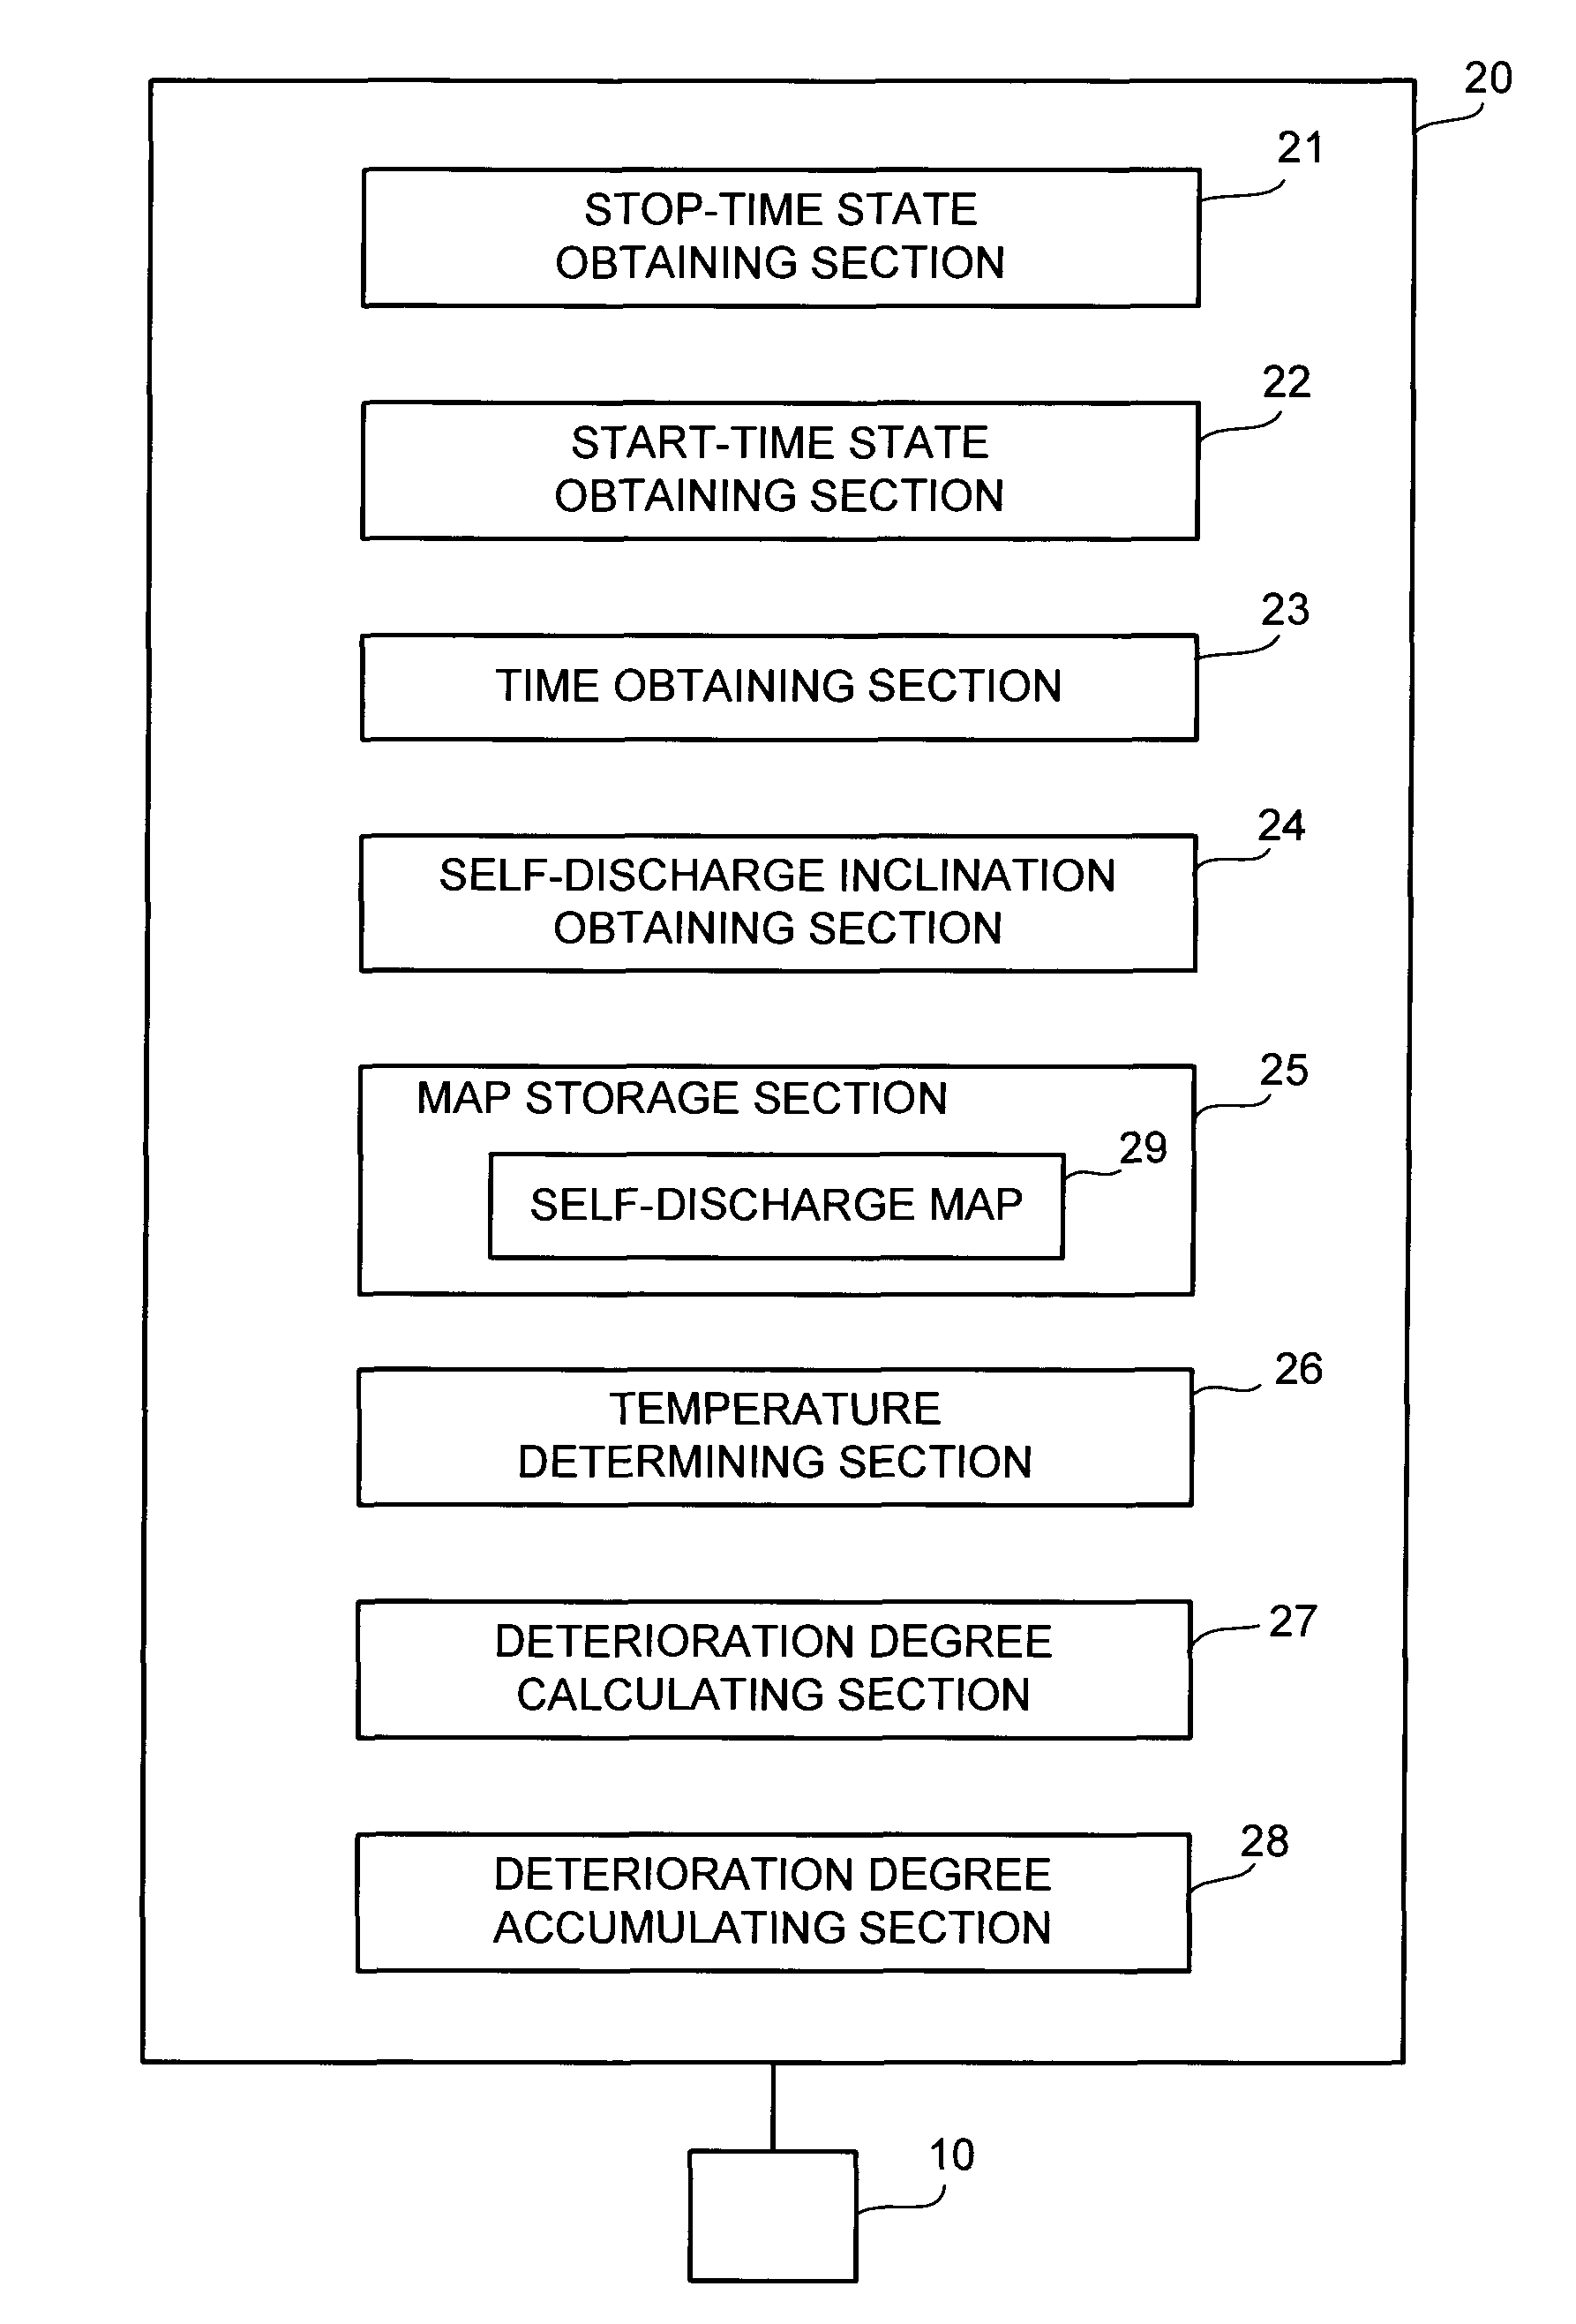 Deterioration degree calculating apparatus for secondary battery, vehicle equipped with the apparatus, and deterioration degree calculating method for secondary battery